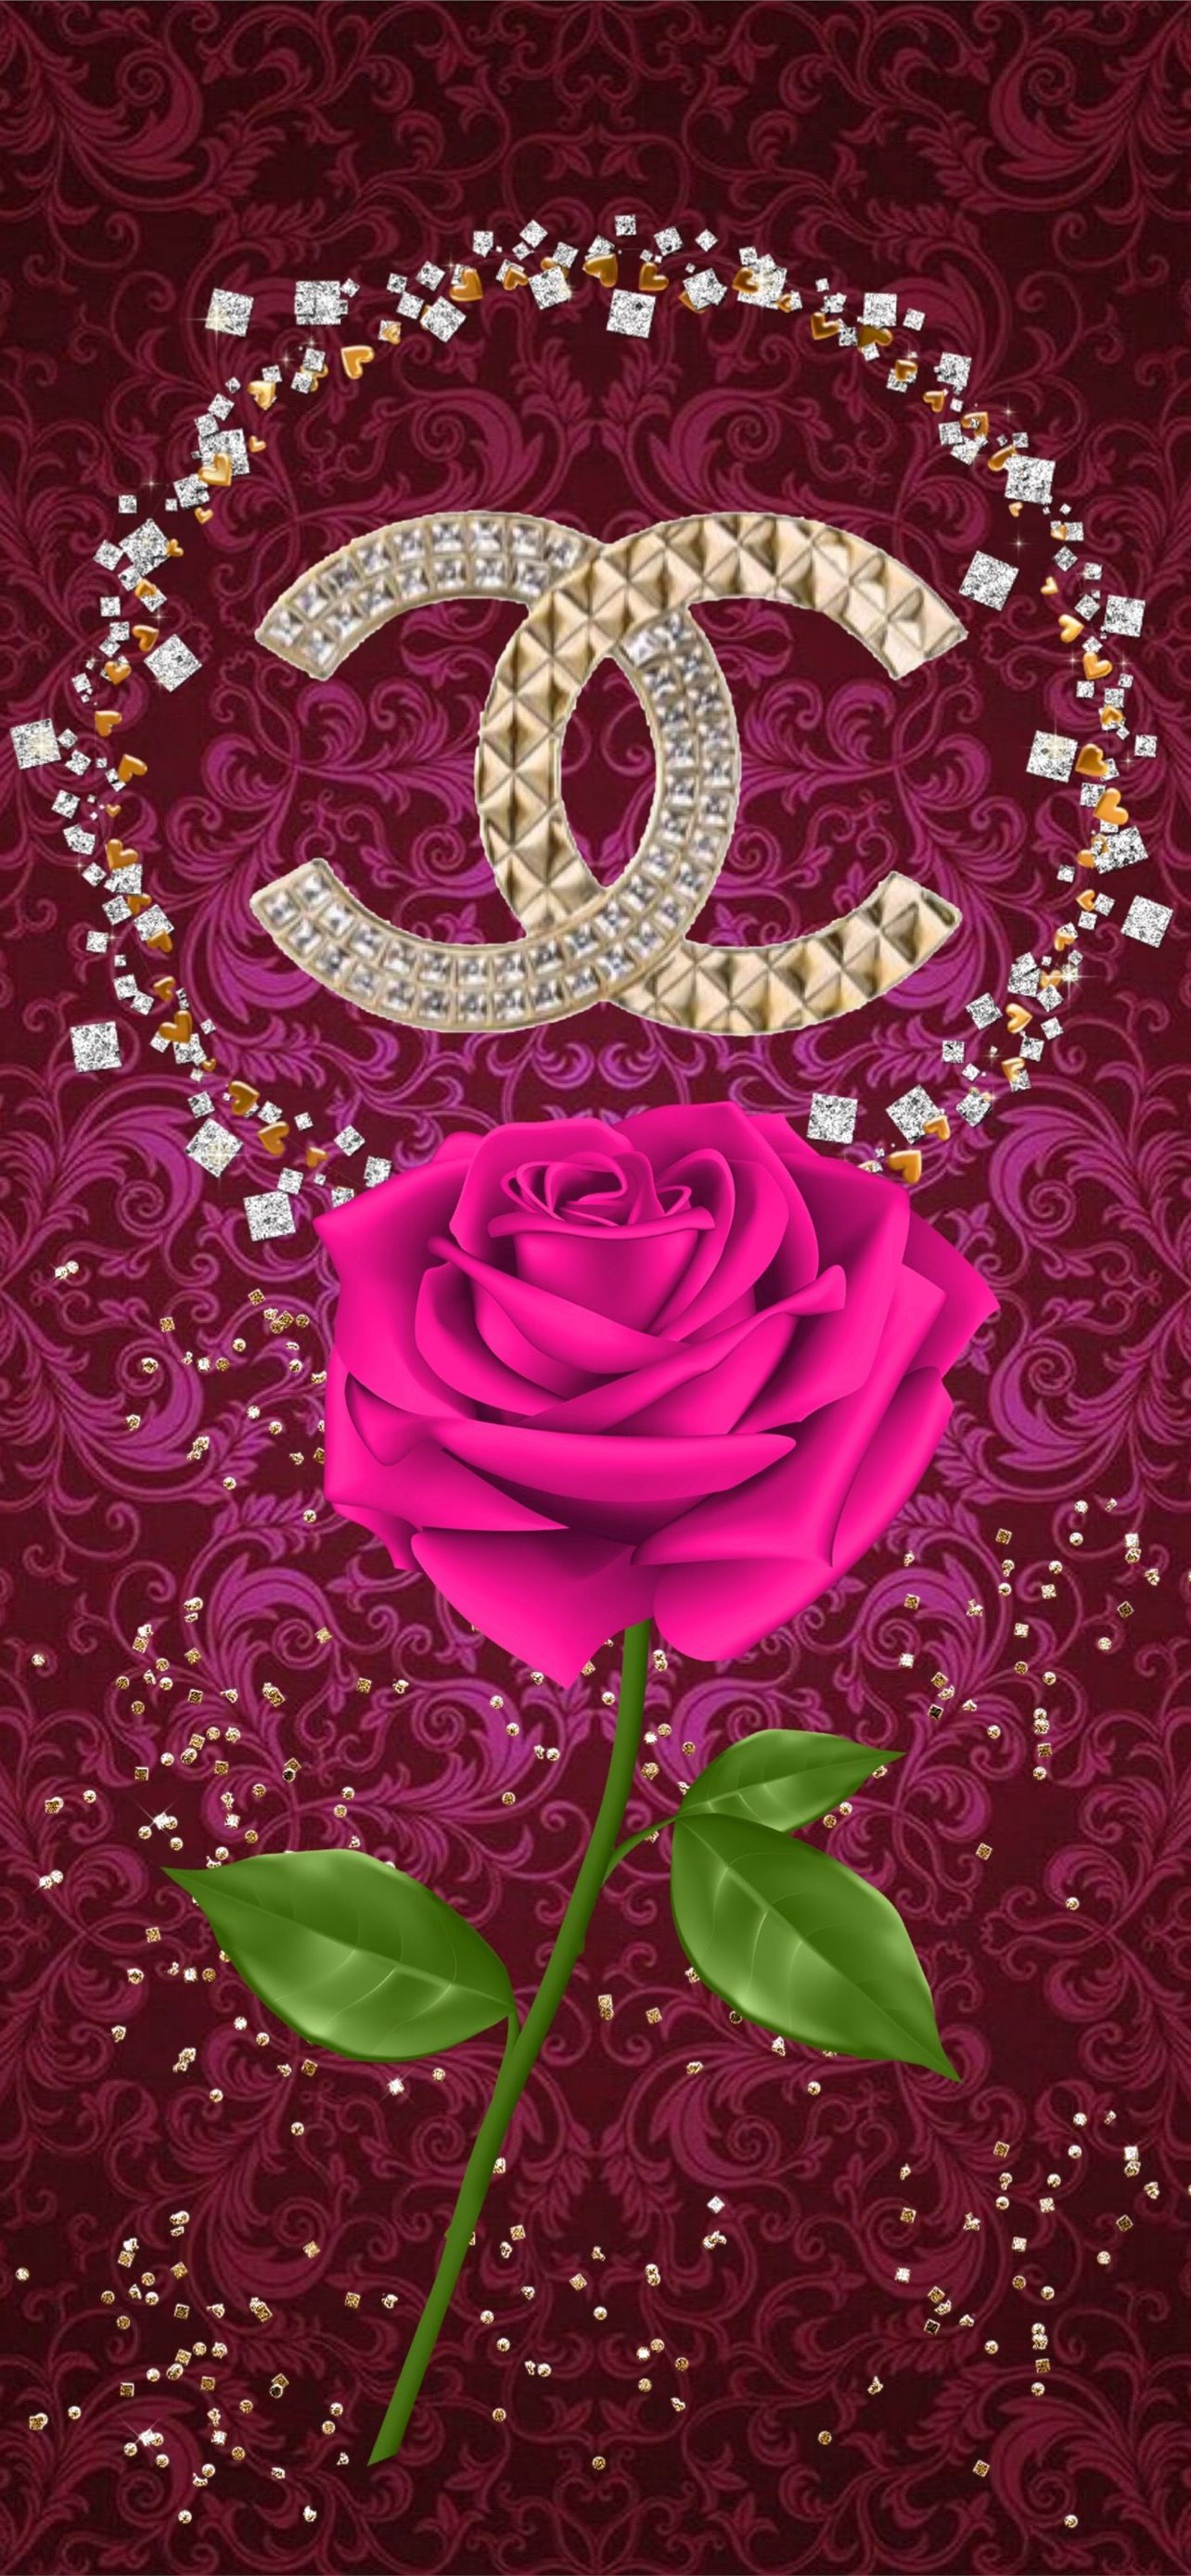 Download Chanel Roses Girly Iphone Wallpaper  Wallpaperscom